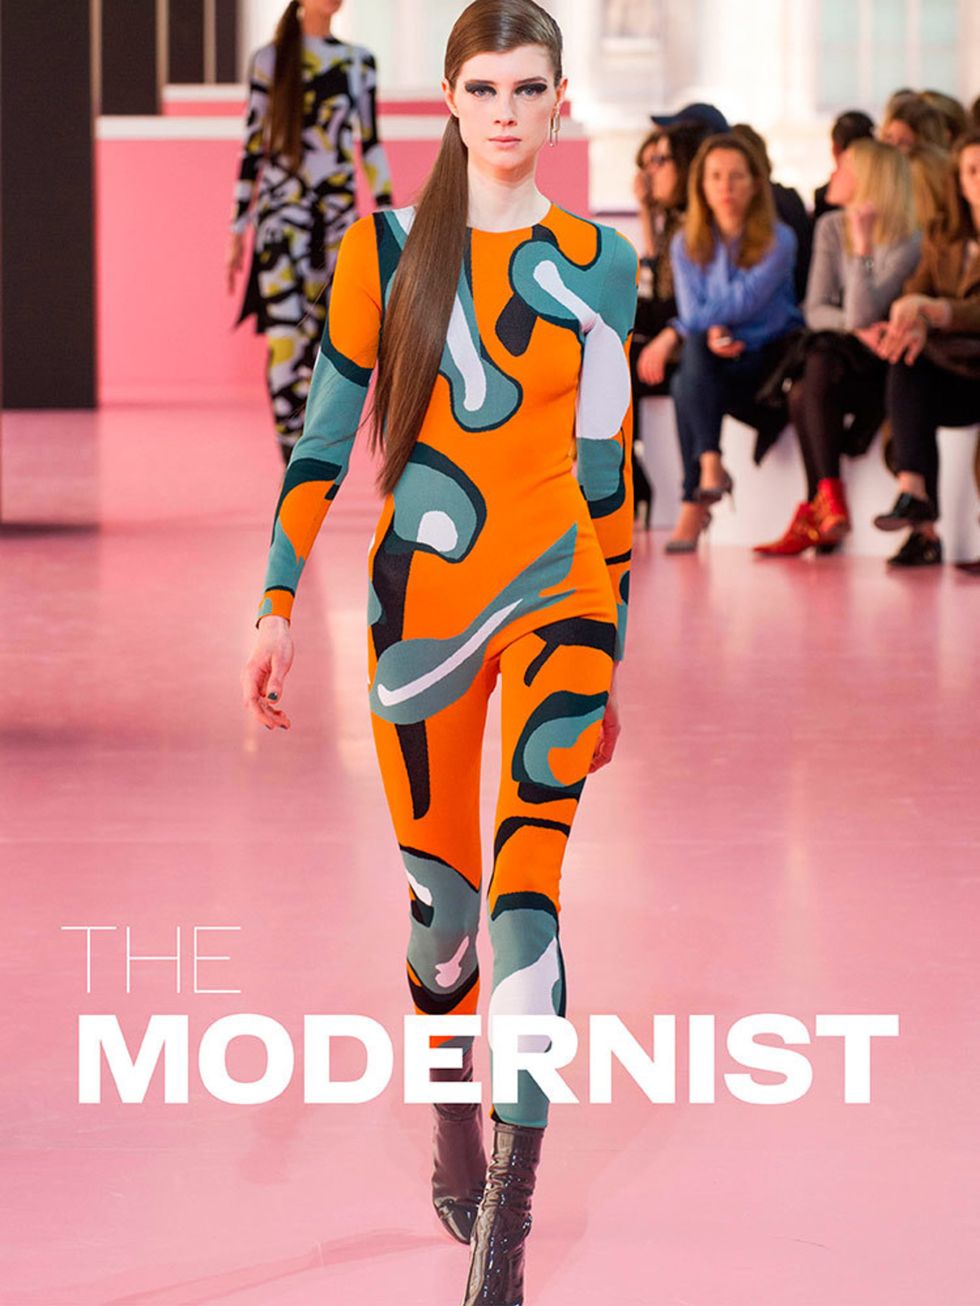 <p><strong>THE MODERNIST</strong></p>

<p>The overarching theme of a/w 2015 is blisteringly modern. Clothes that strike out with bold, clean lines and bursts of colour  make that wonderfully weird colour. Print goes optical, fabrics get more extreme, sha